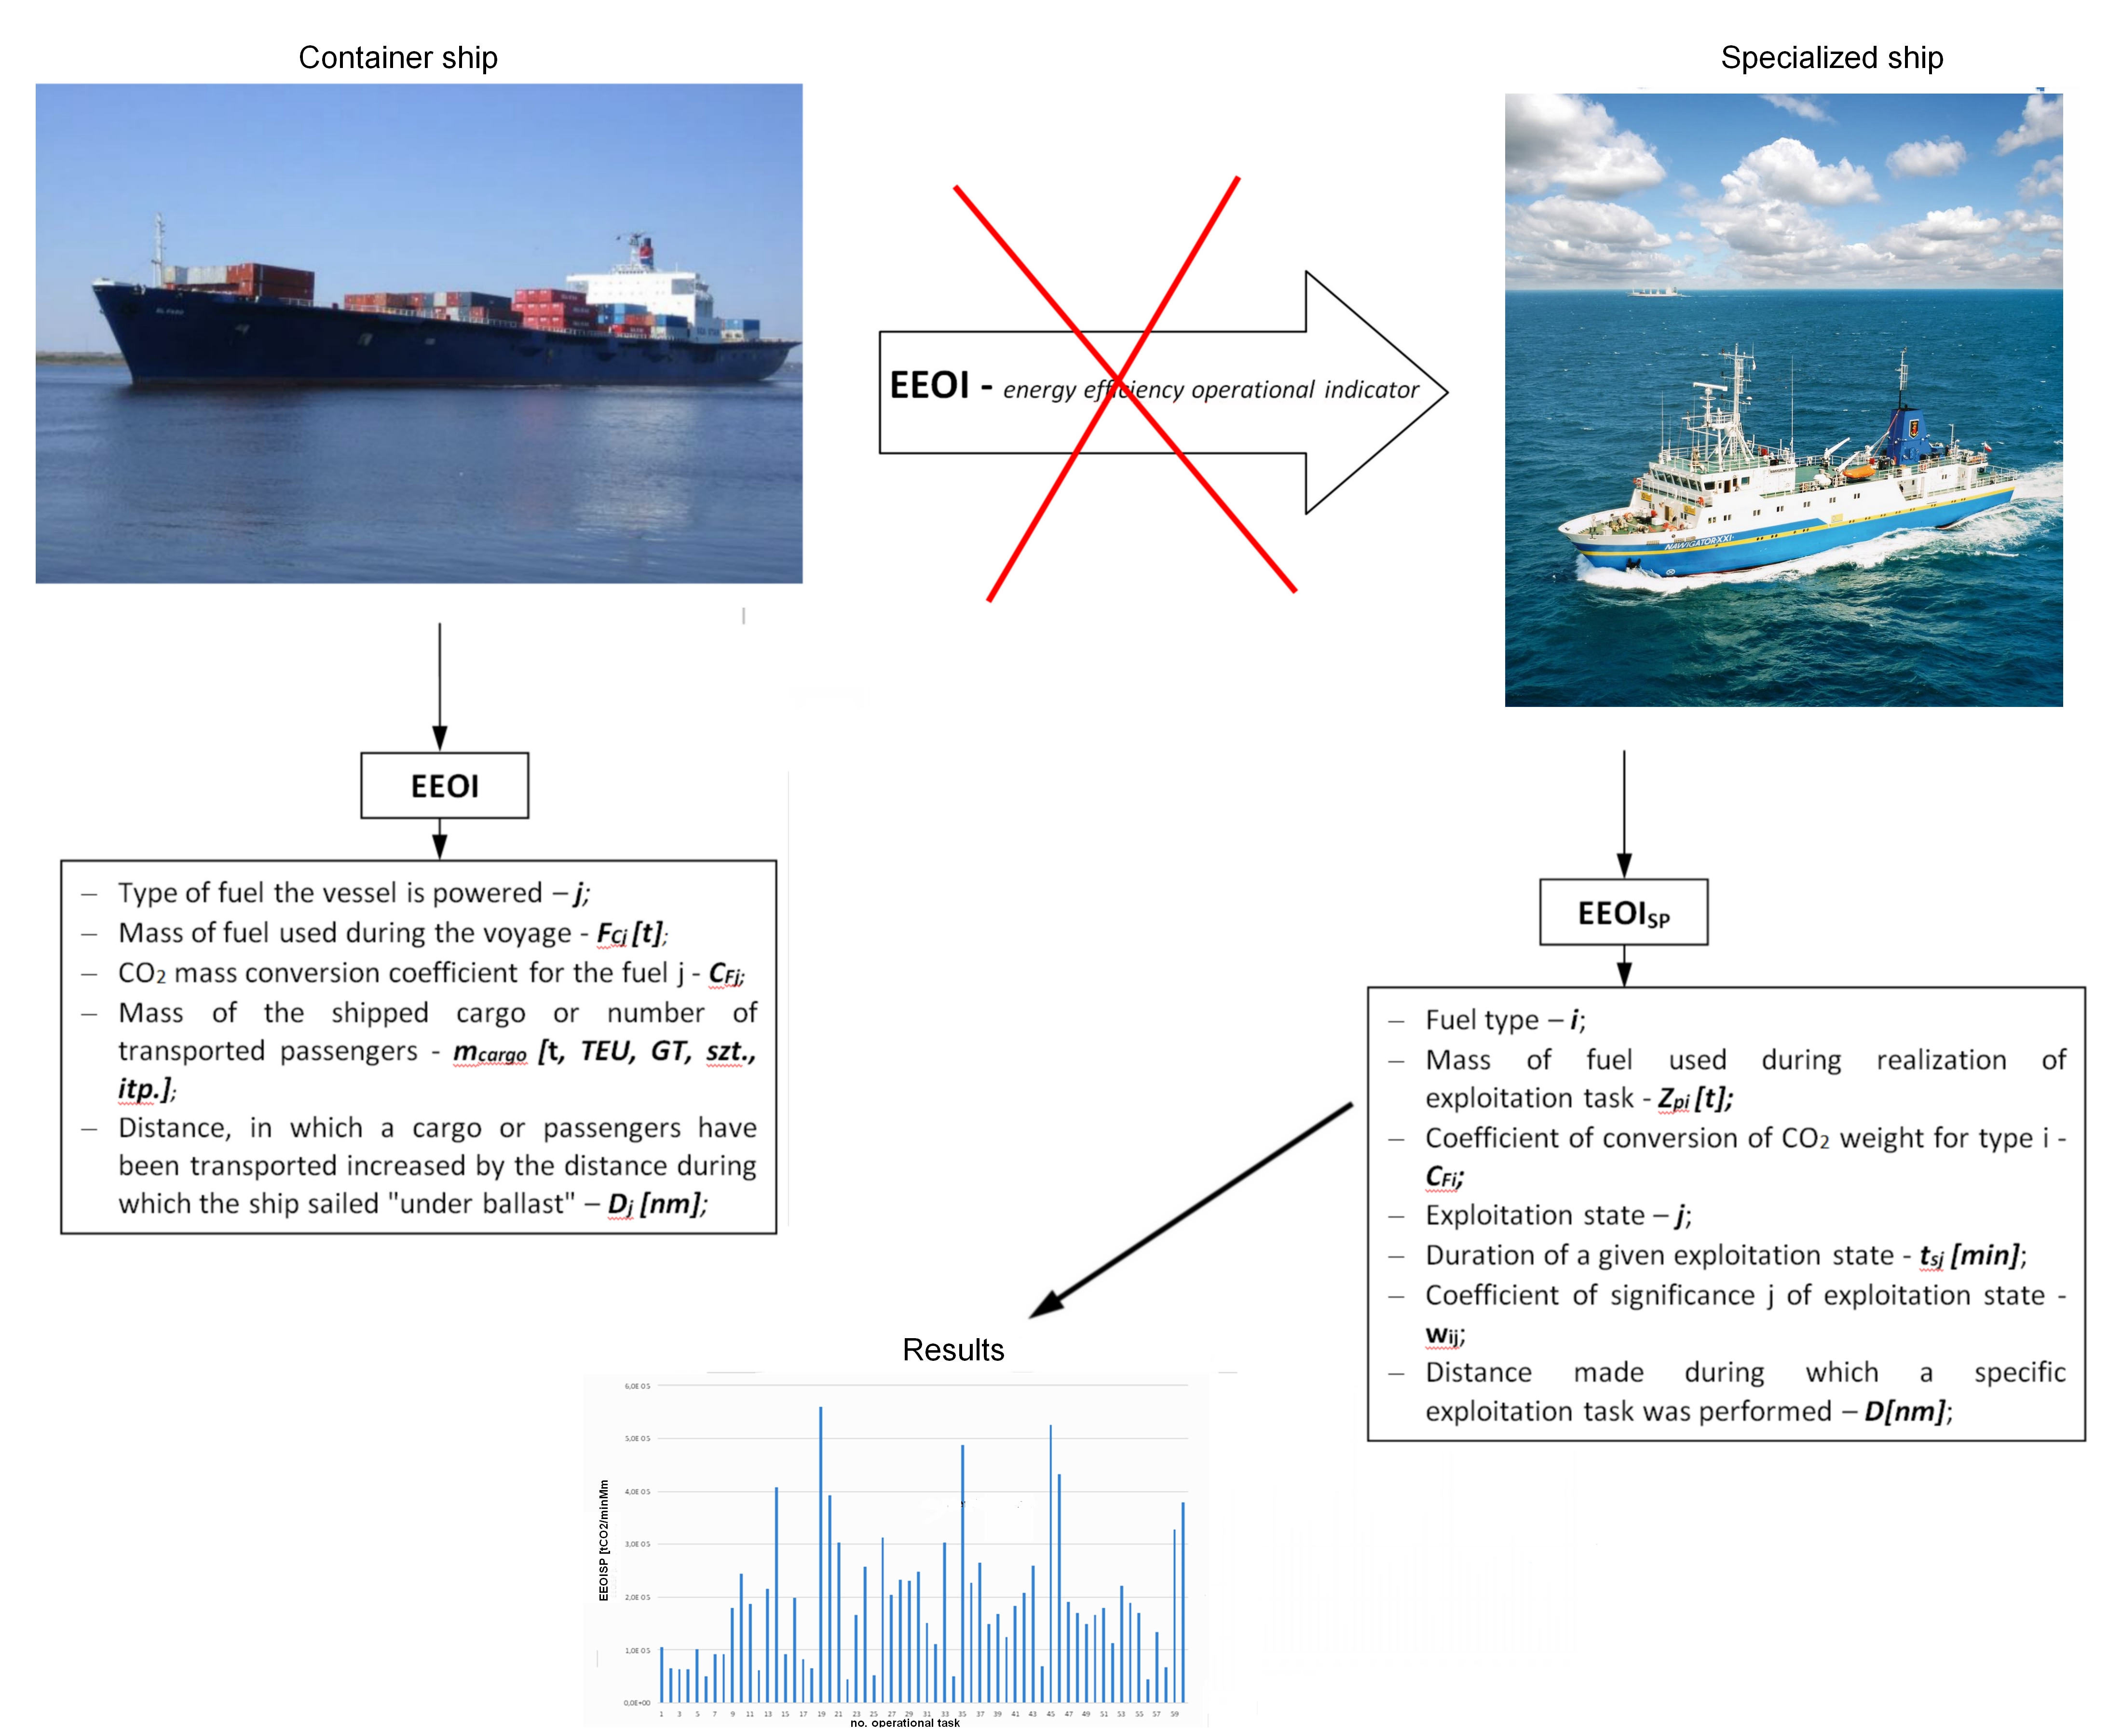 Energies | Free Full-Text | A New Method of Determining Energy Efficiency  Operational Indicator for Specialized Ships | HTML